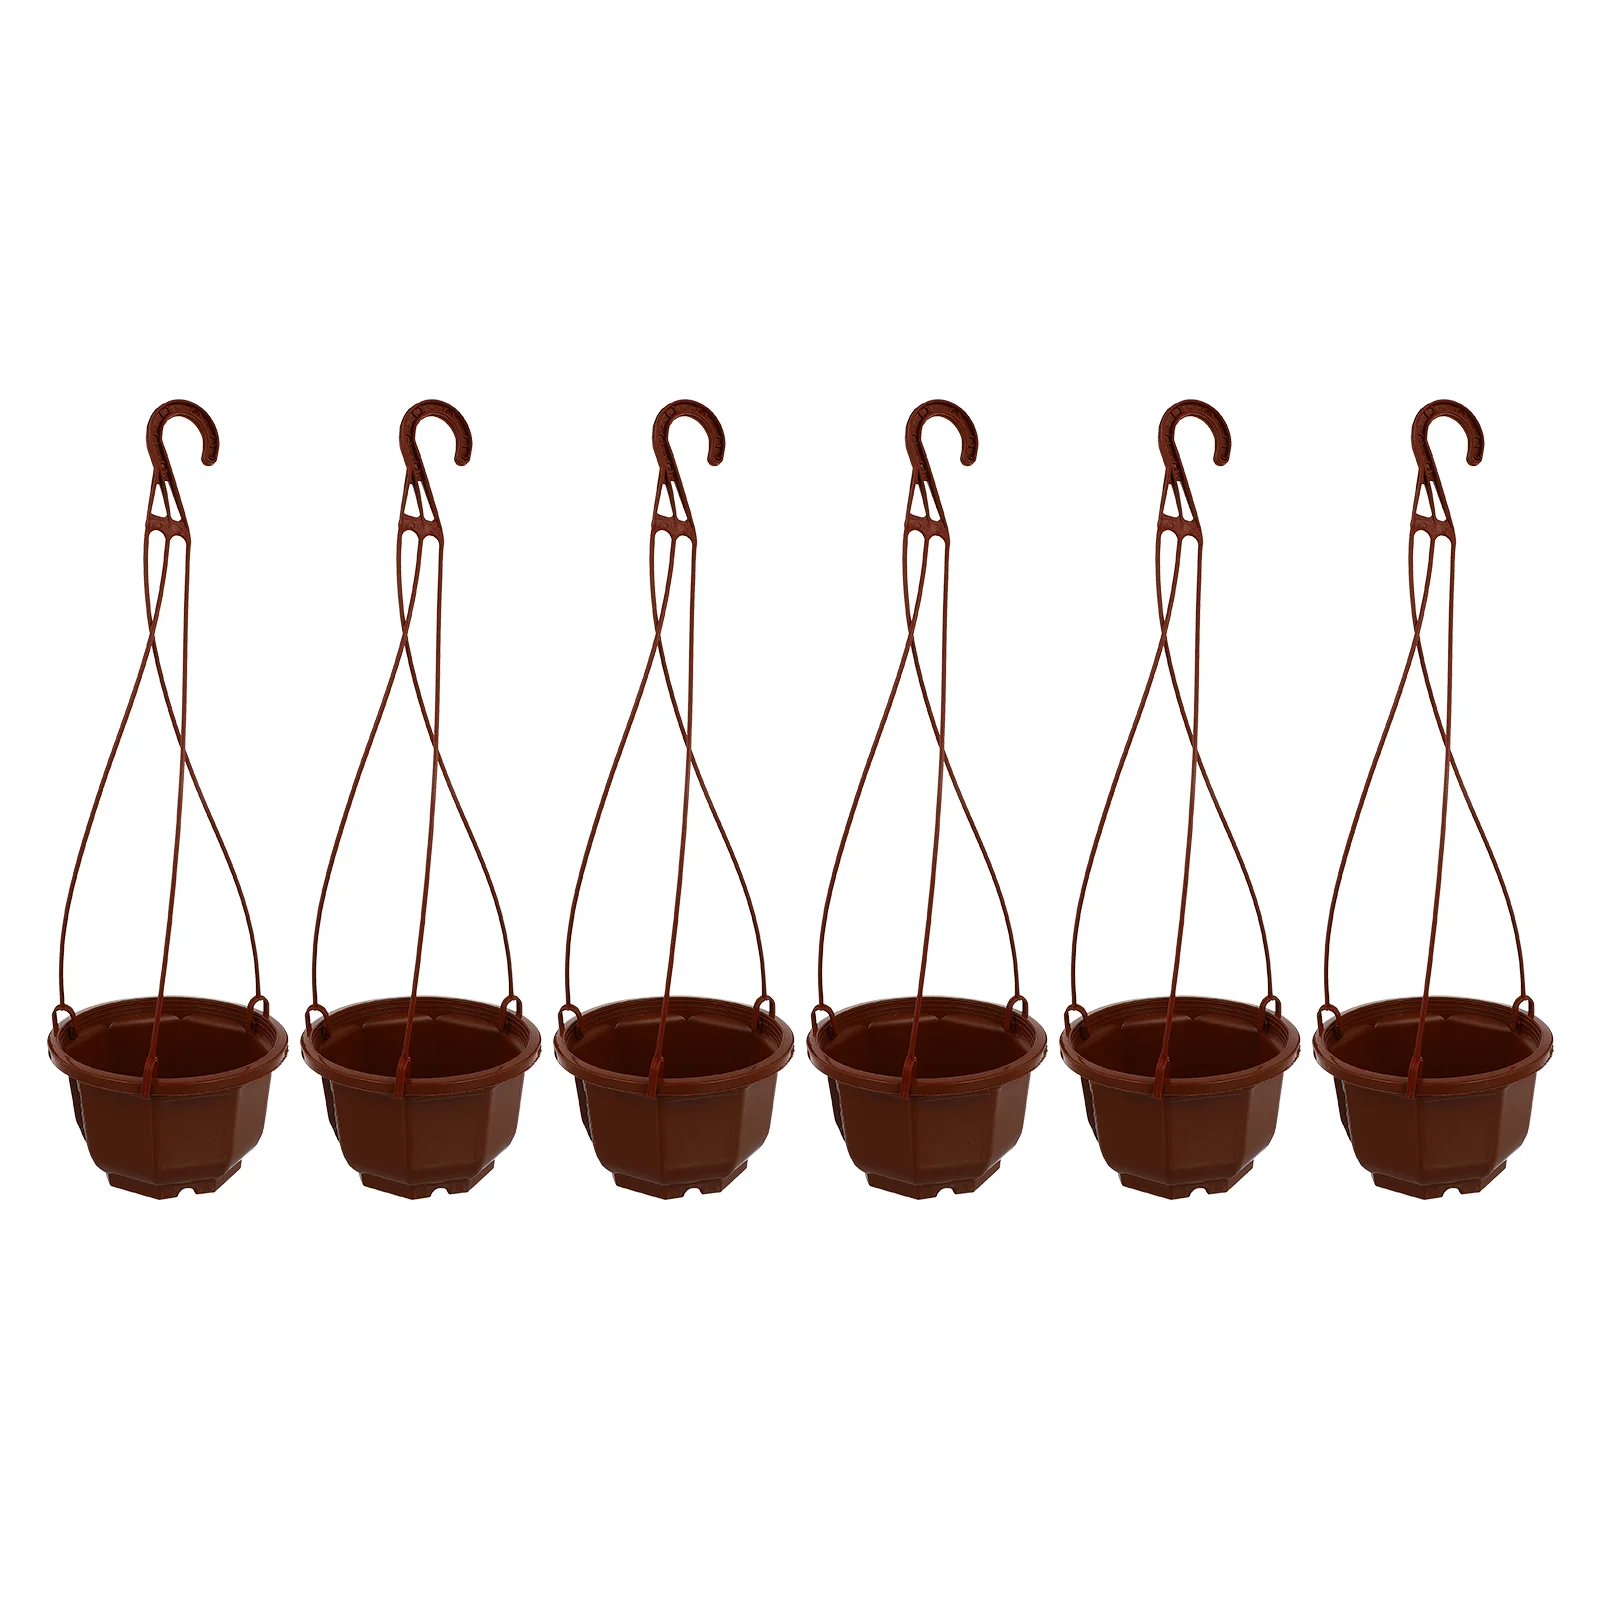 

Hanging Planter Pots Flower Pot Basket Planters Holder Succulent Wall Orchid Baskets Indoor Container Holders Balcony Railing